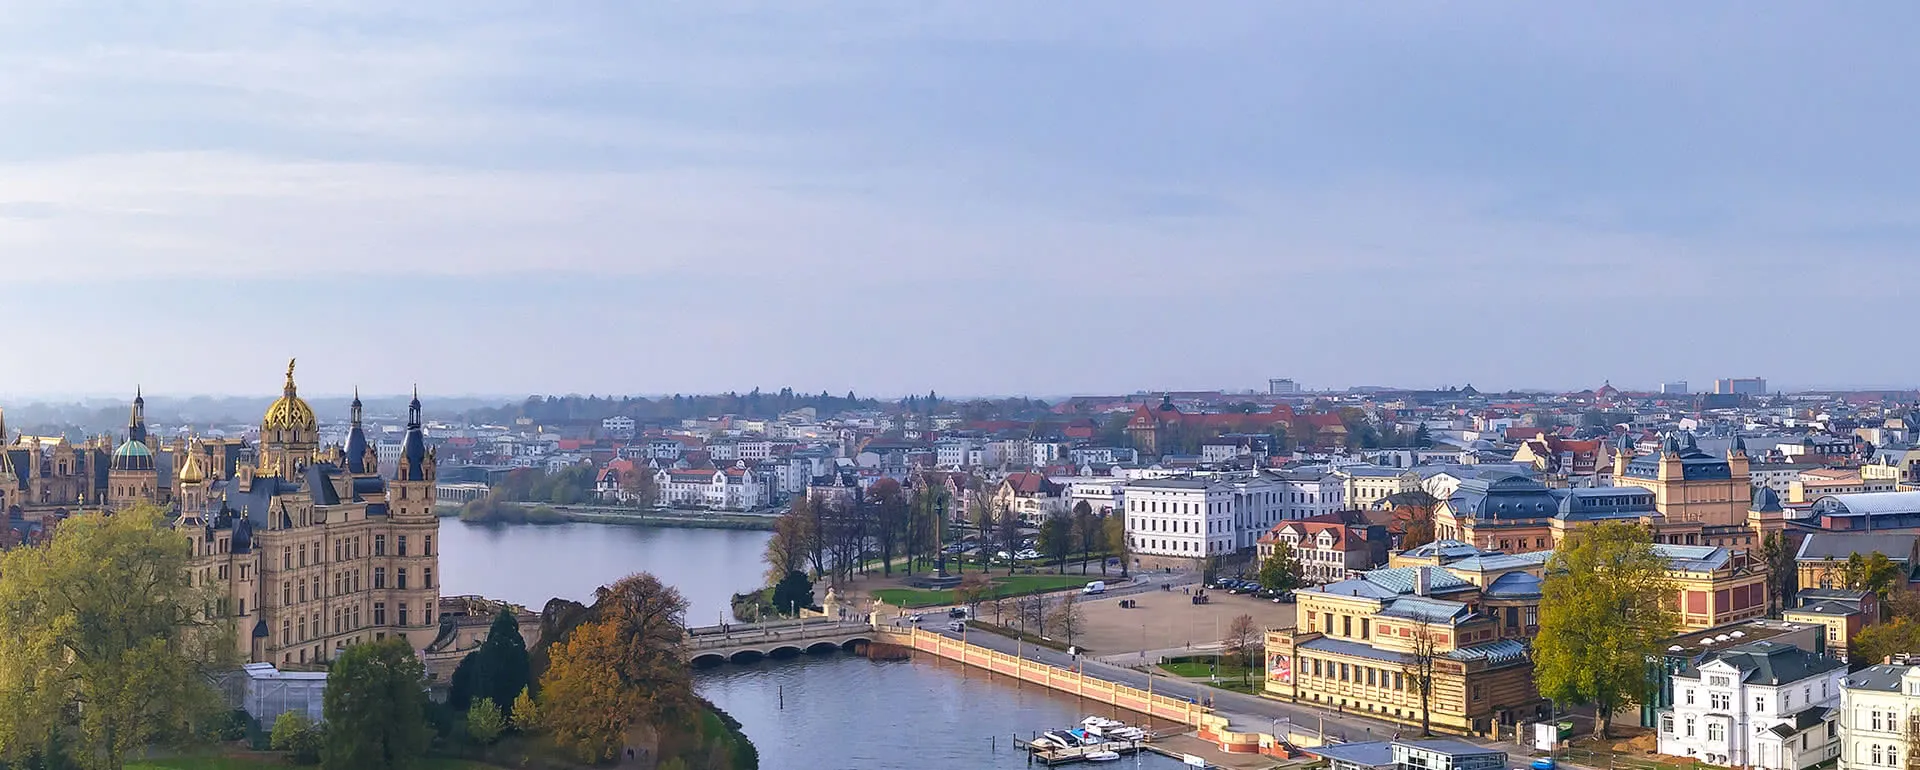 Schwerin - the destination with youth hostels